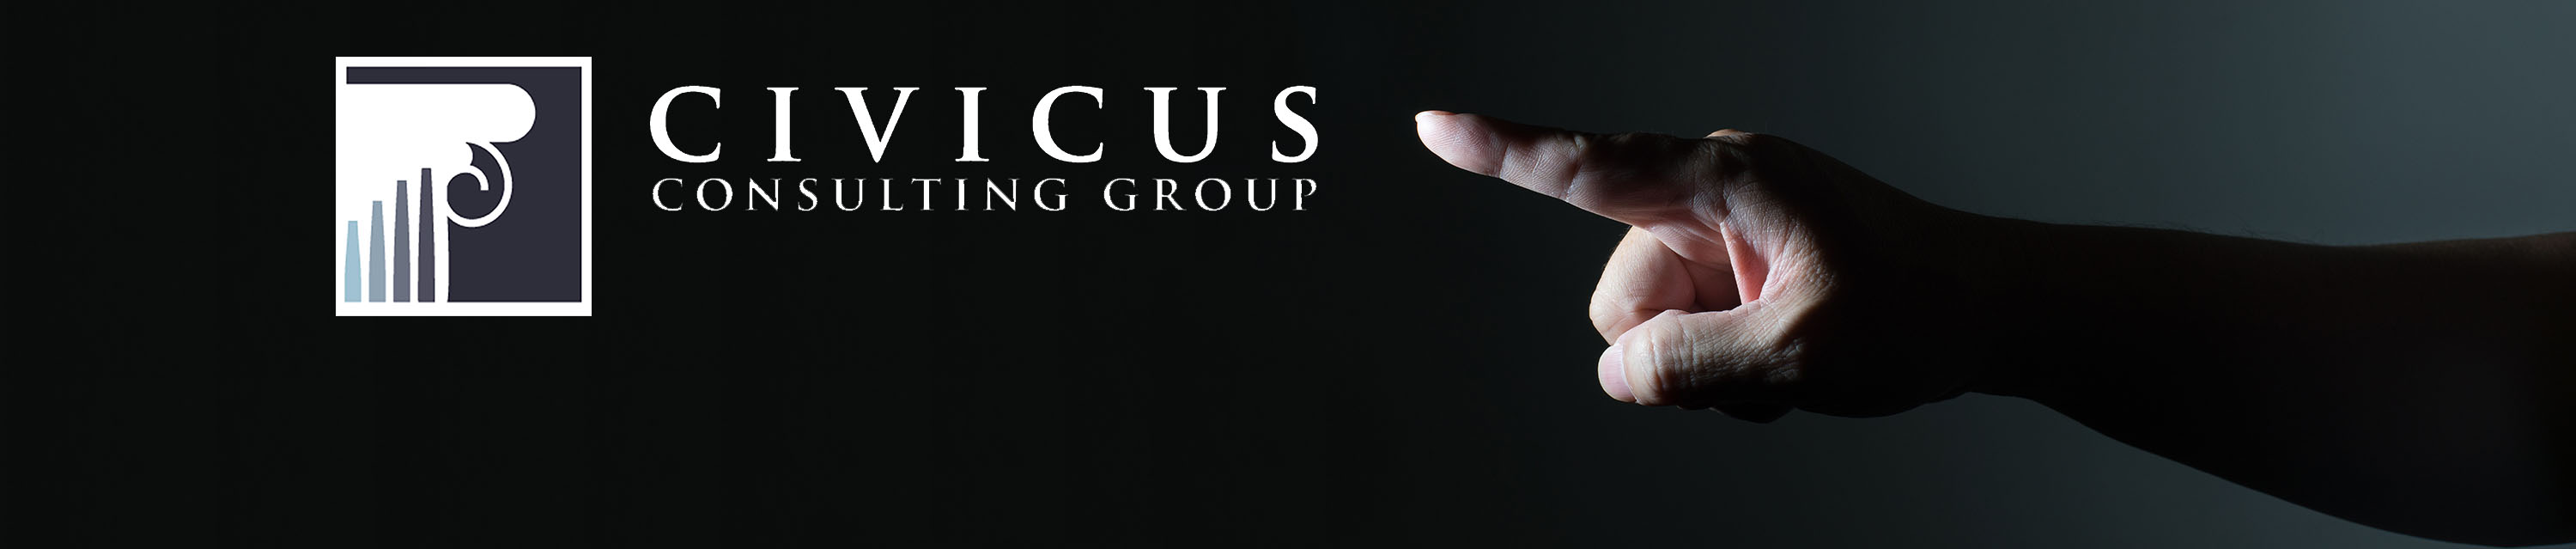 Civicus Consulting Group